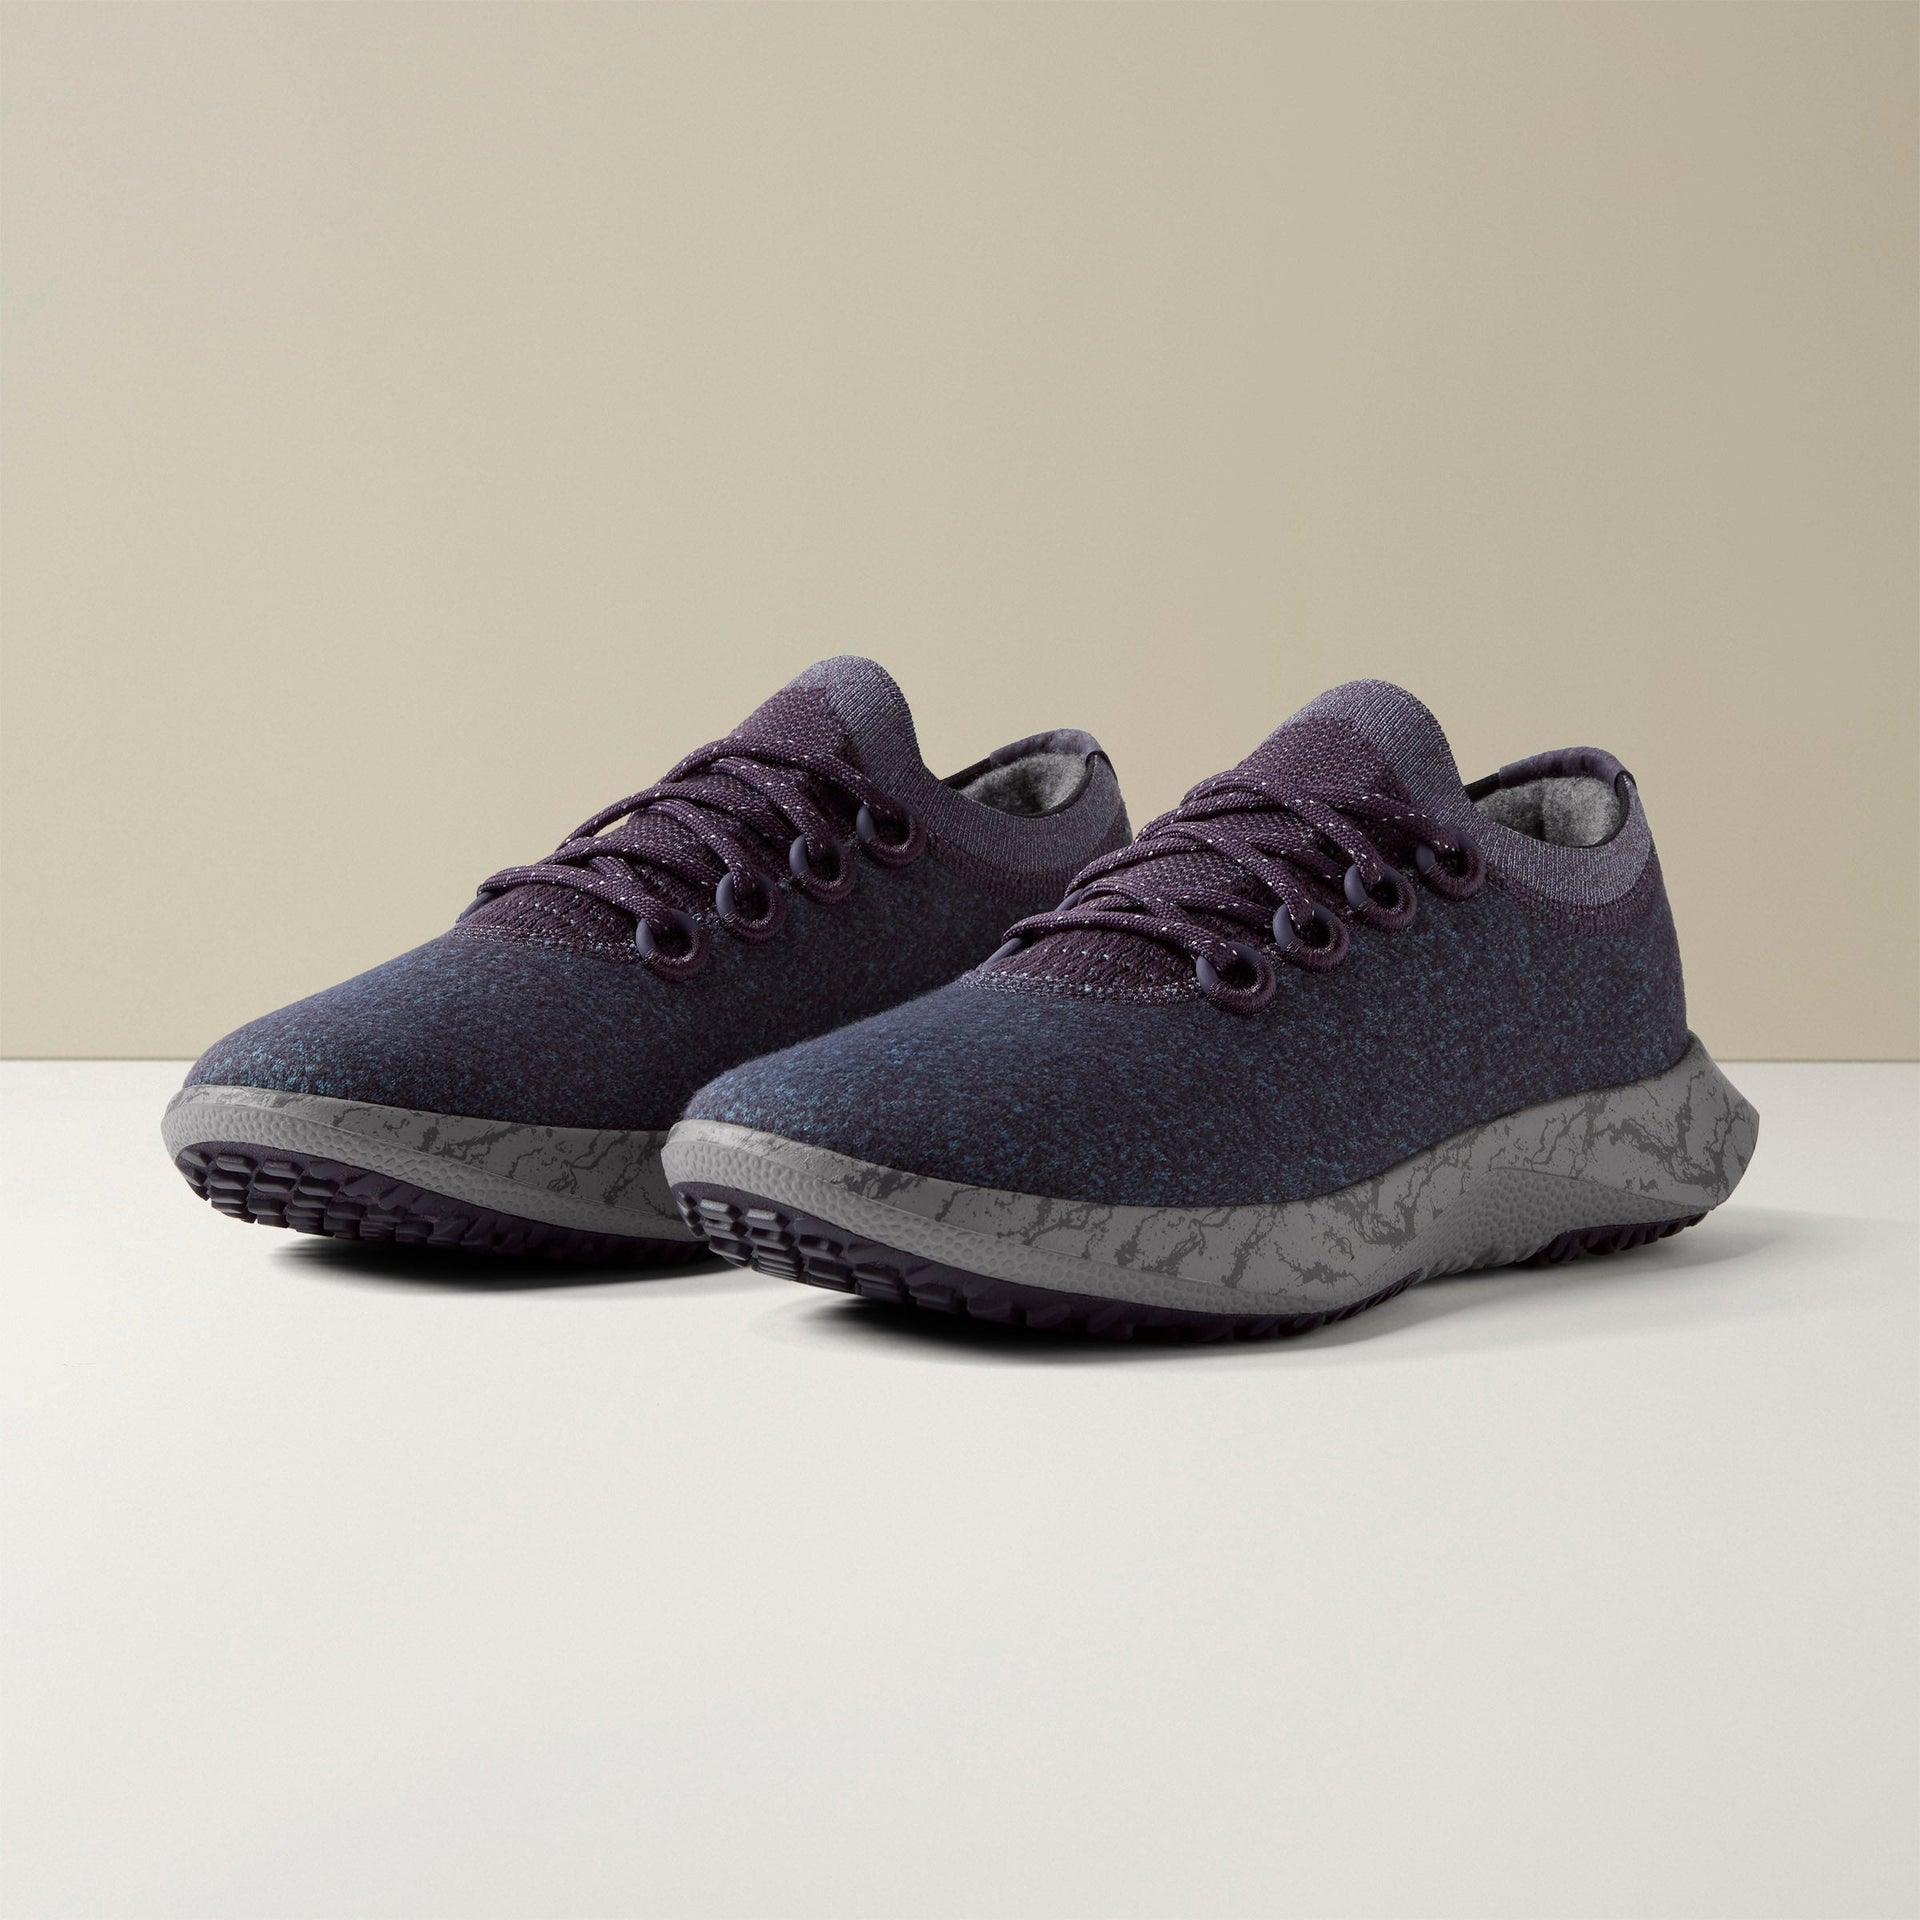 Wool Dasher Mizzles pour hommes - Thunder Purple / Stormy Teal (Medium Grey)